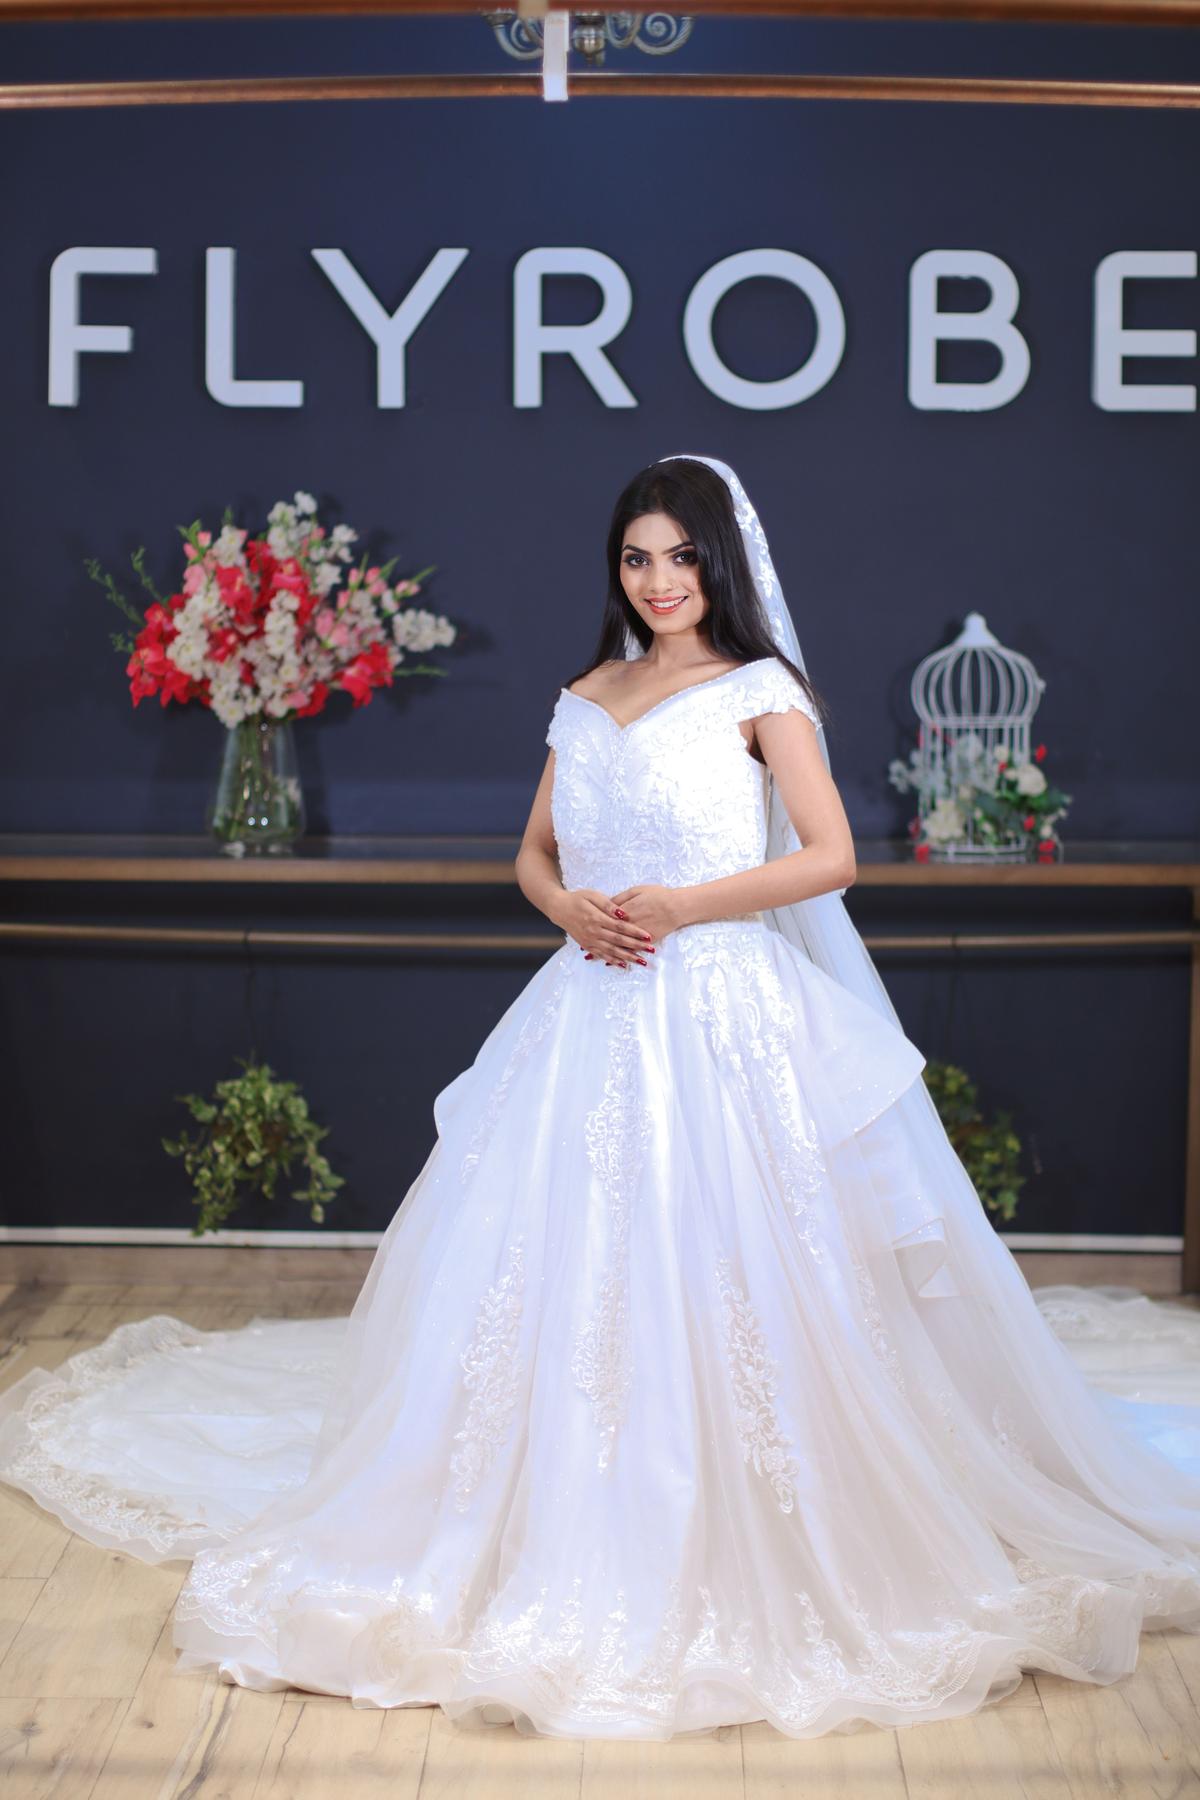 Christian White Wedding Gown at Best Price in Bhopal | Lorean Wedding Gown-megaelearning.vn